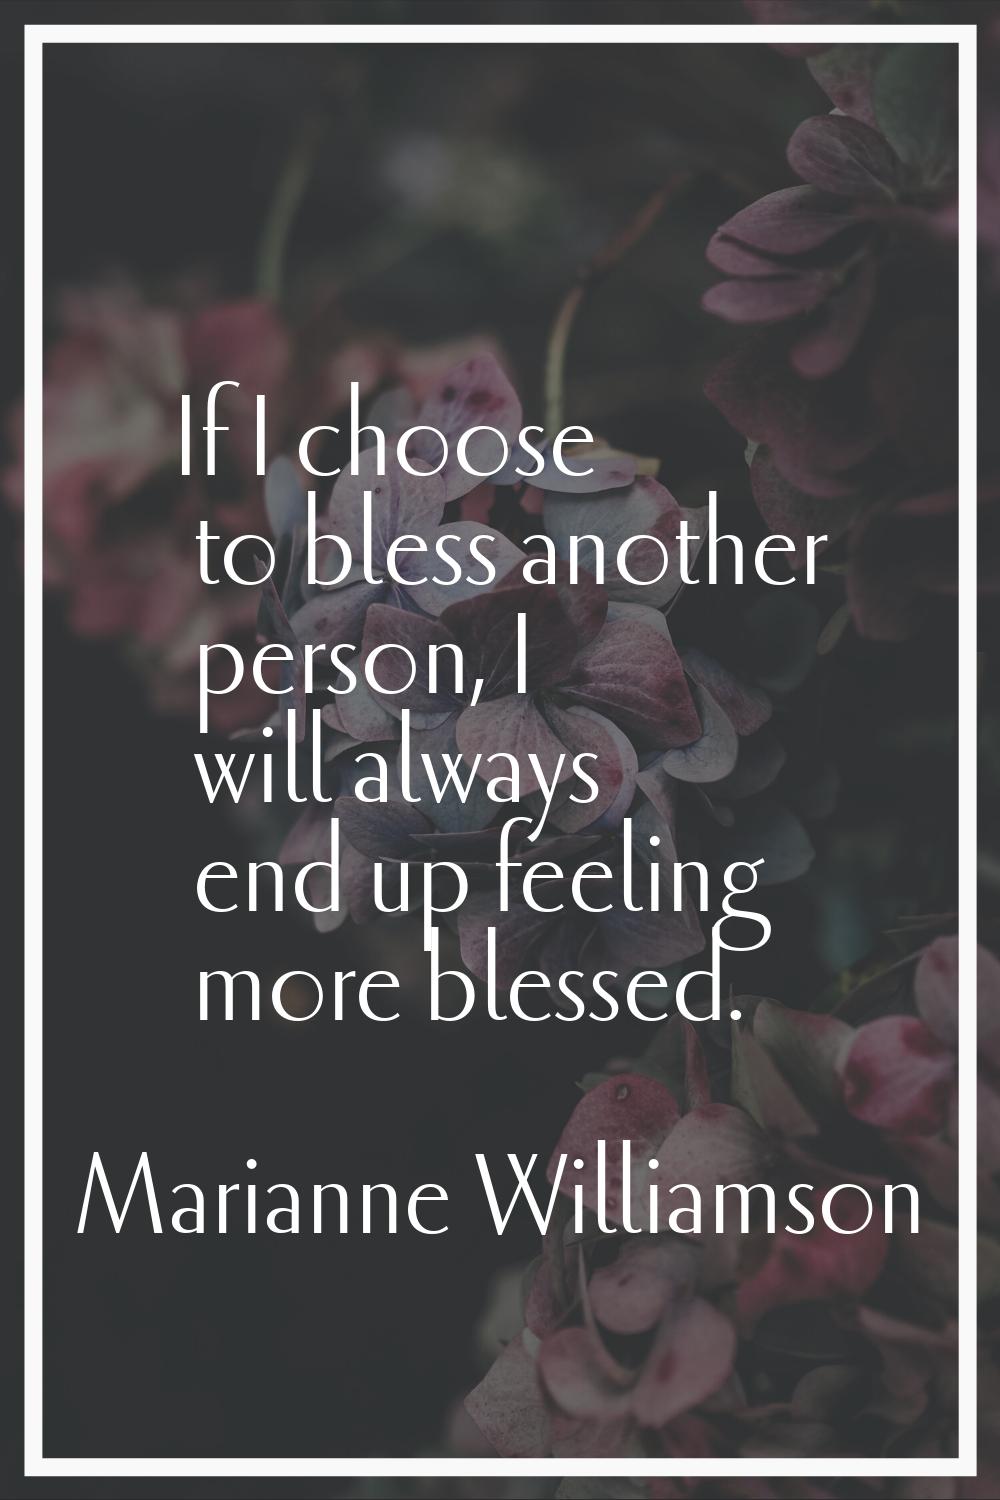 If I choose to bless another person, I will always end up feeling more blessed.